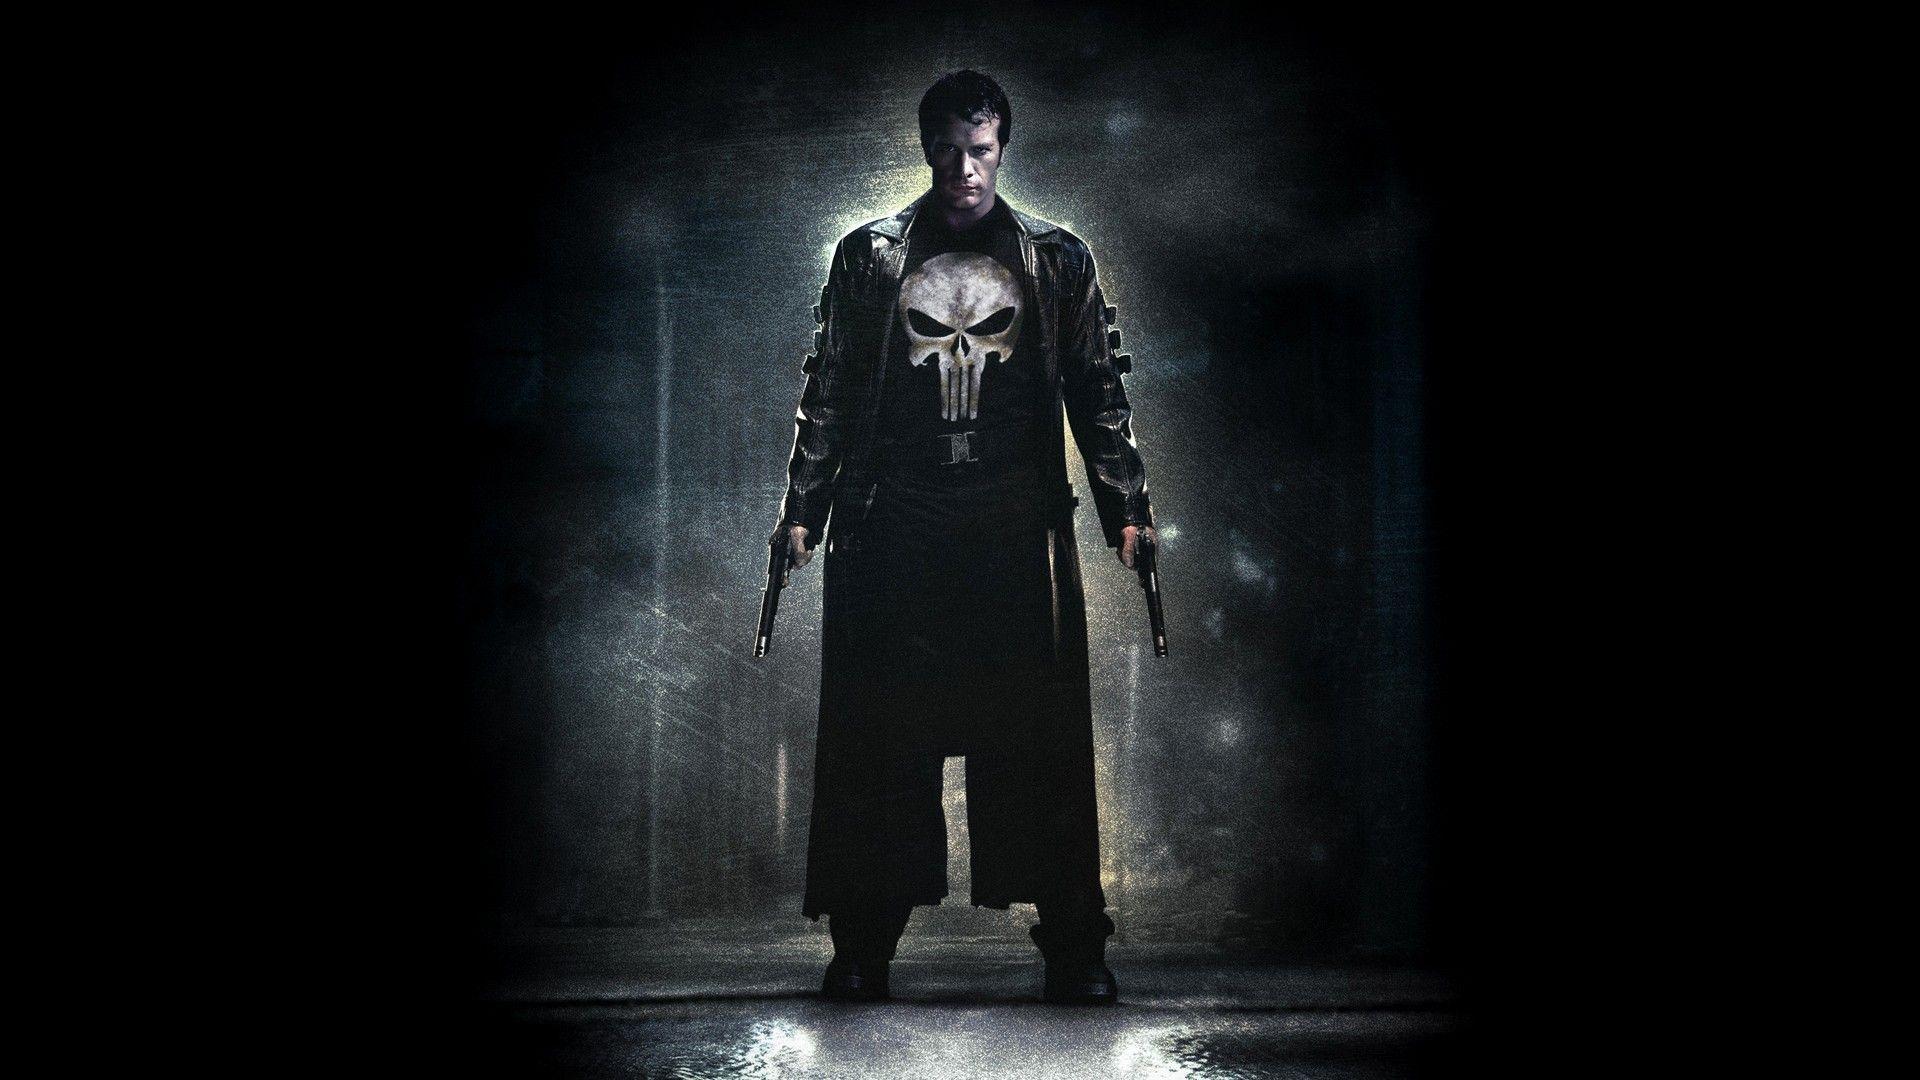 The Punisher wallpaperDownload free amazing full HD background